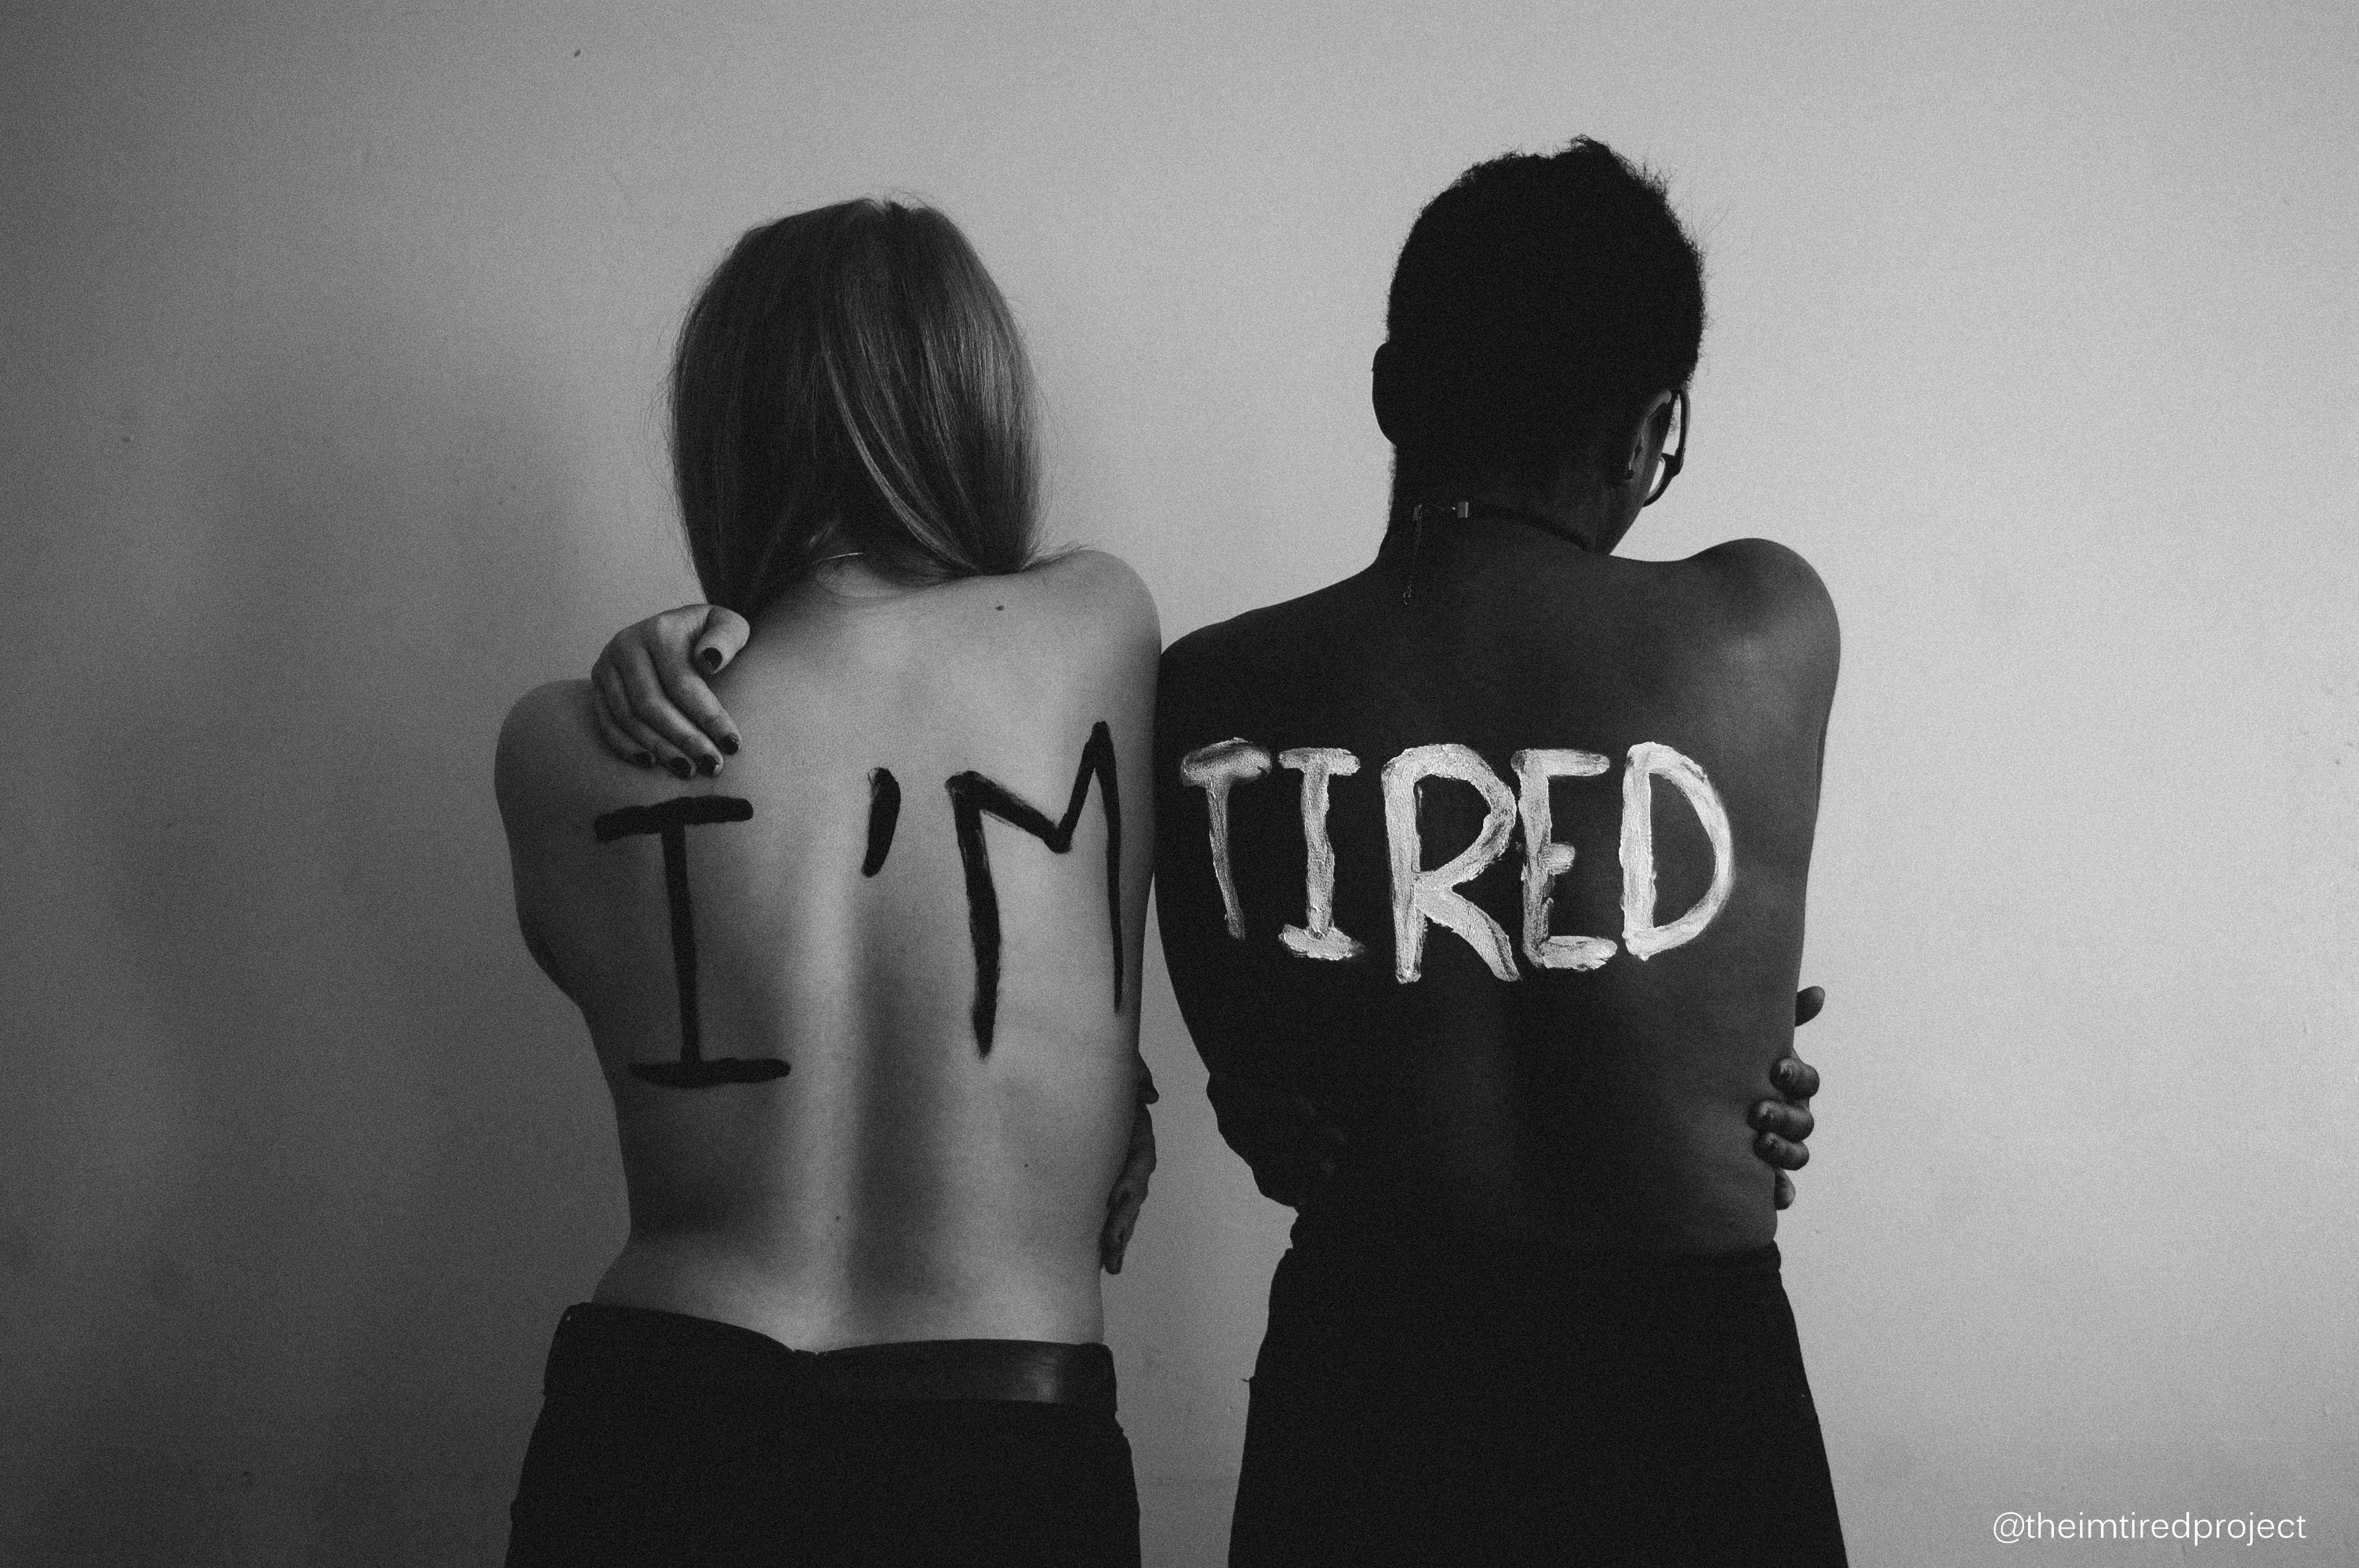 ‘I’m tired of being the angry black woman’ – a photography project tackling microaggressions